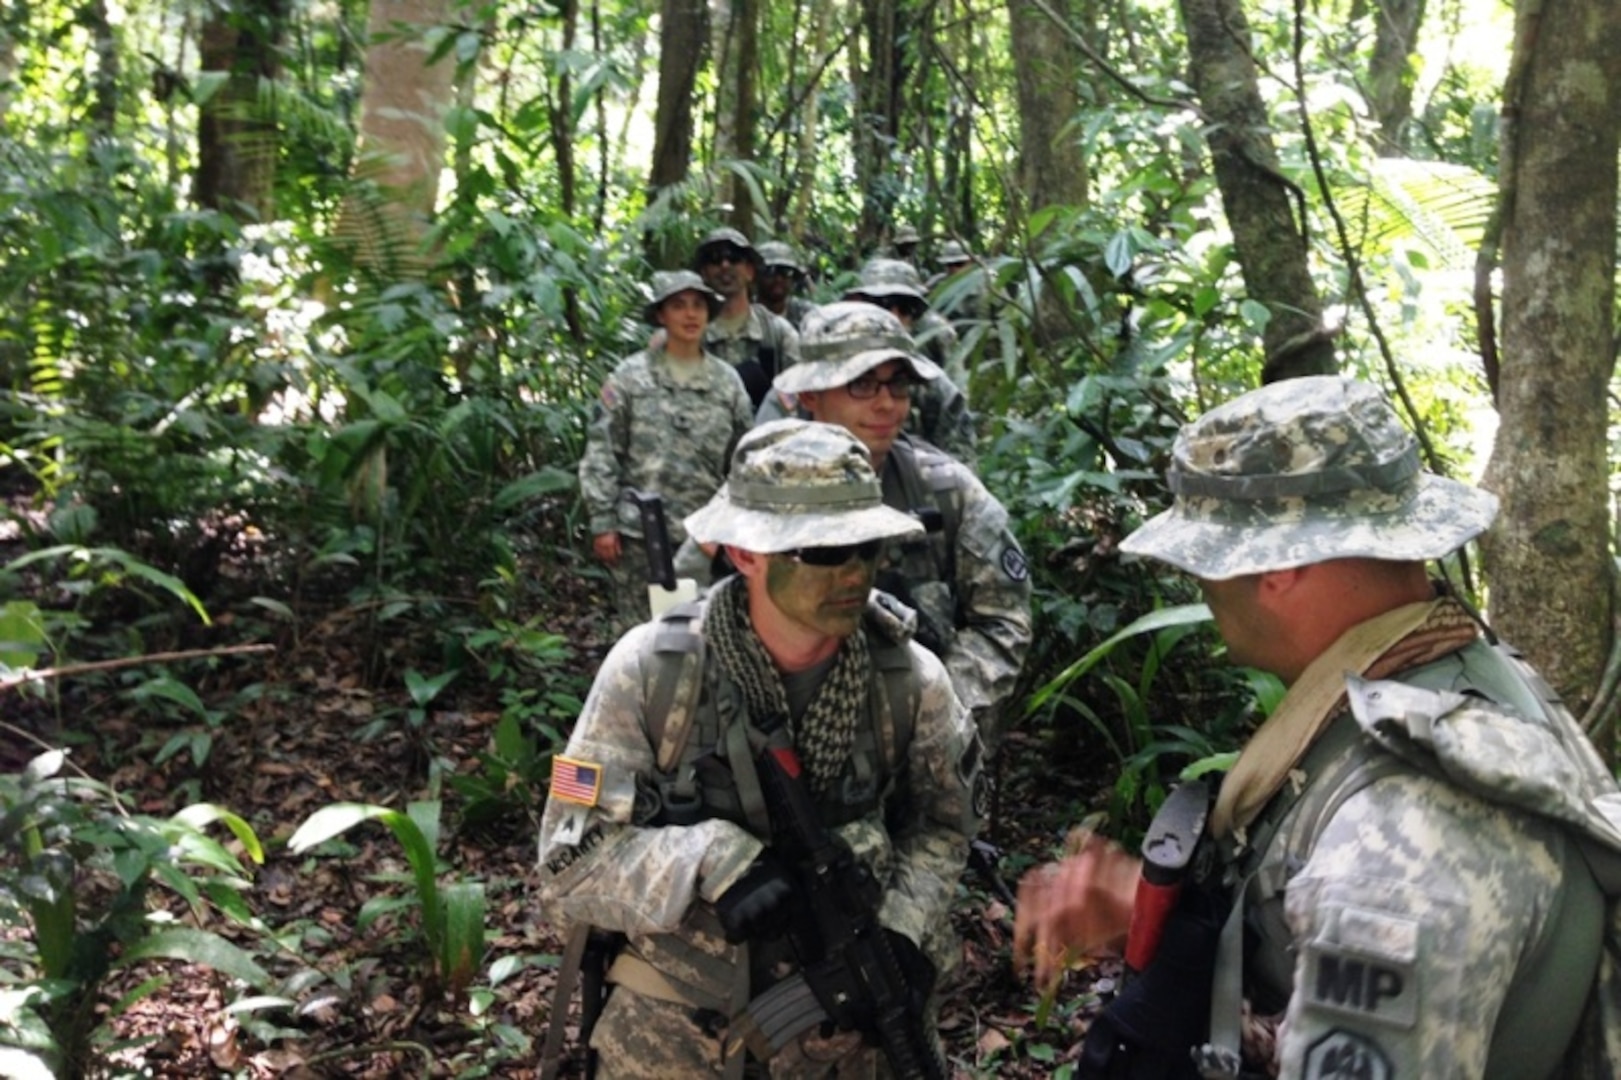 Louisiana National Guard members practice jungle-warfare techniques during a training exercise in Cayo, Belize, July 1, 2014. The training, part of the National Guard’s State Partnership Program.